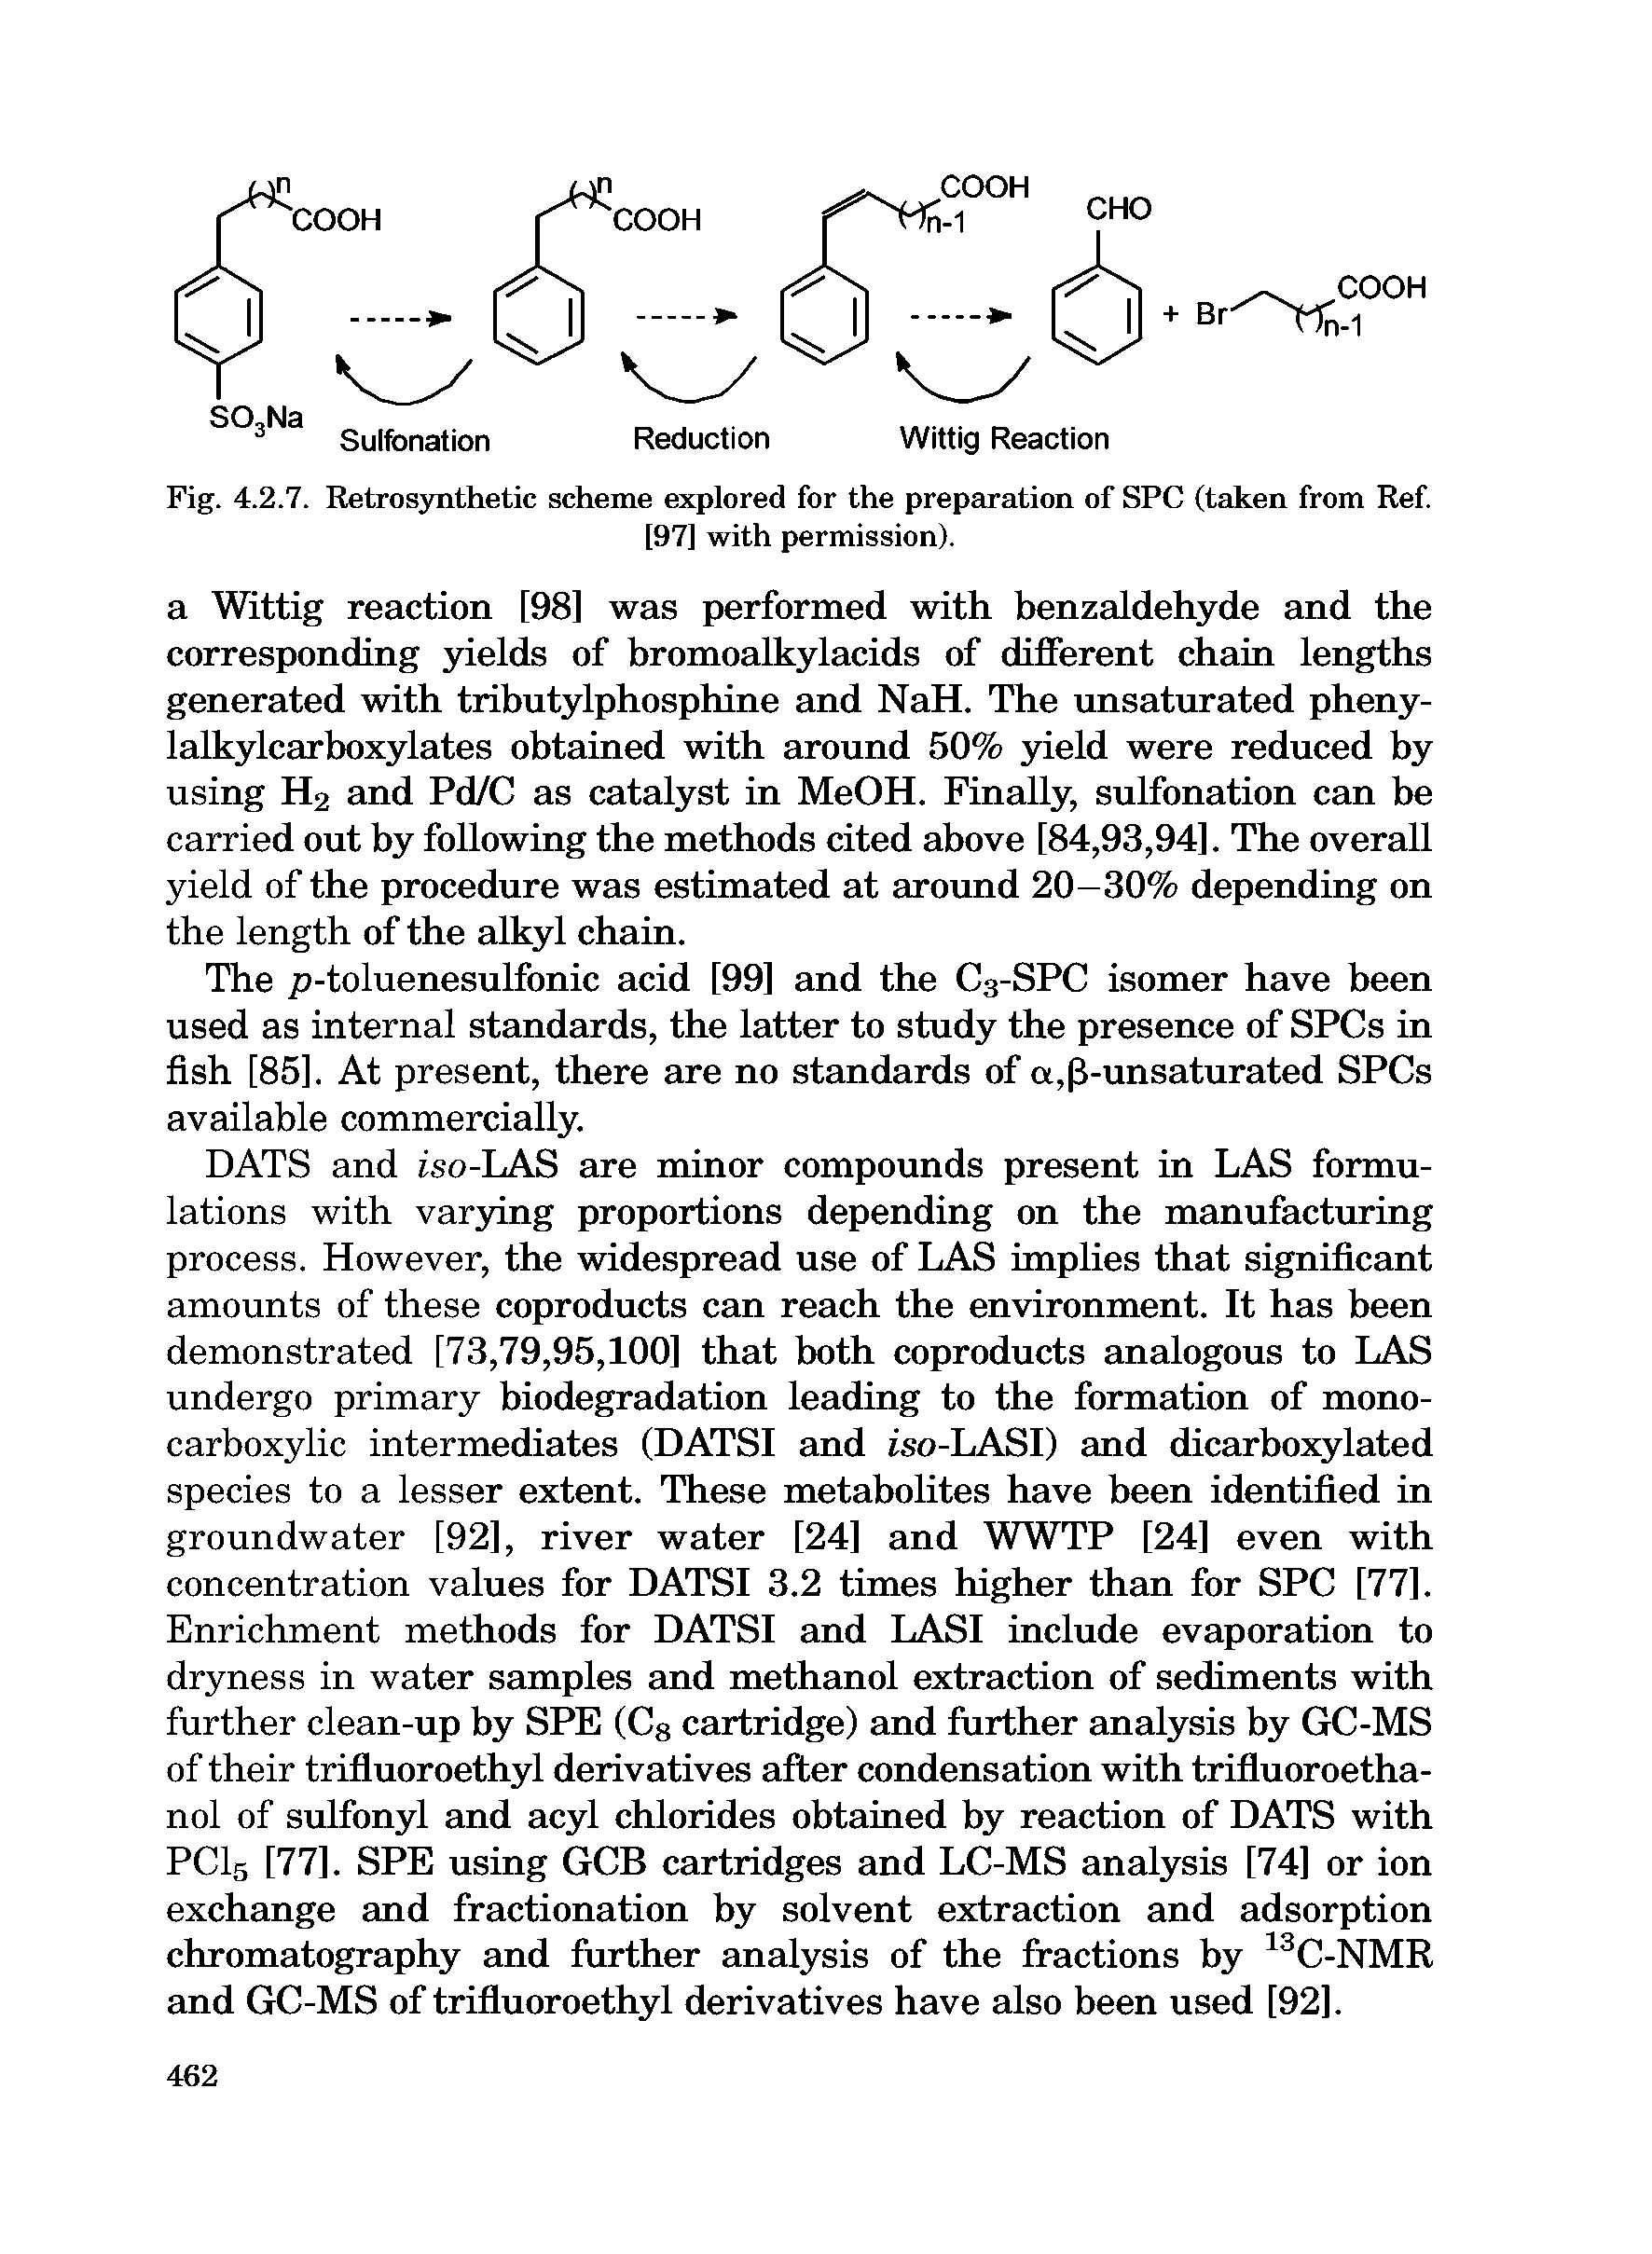 Fig. 4.2.7. Retrosynthetic scheme explored for the preparation of SPC (taken from Ref.